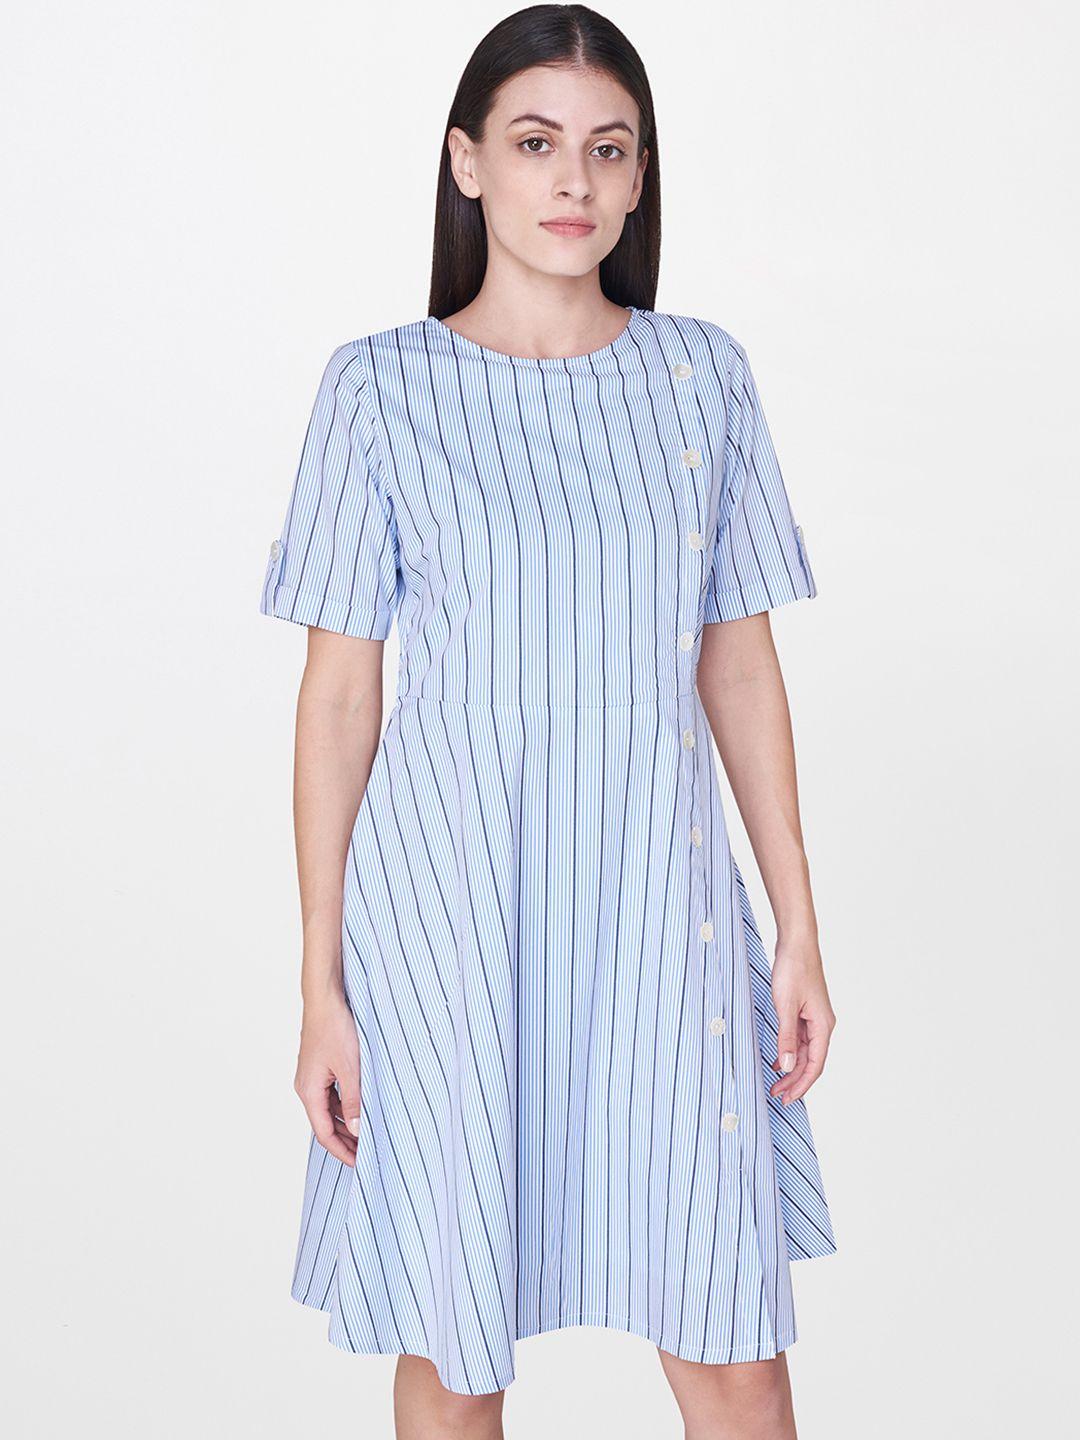 and-women-blue-striped-fit-and-flare-dress